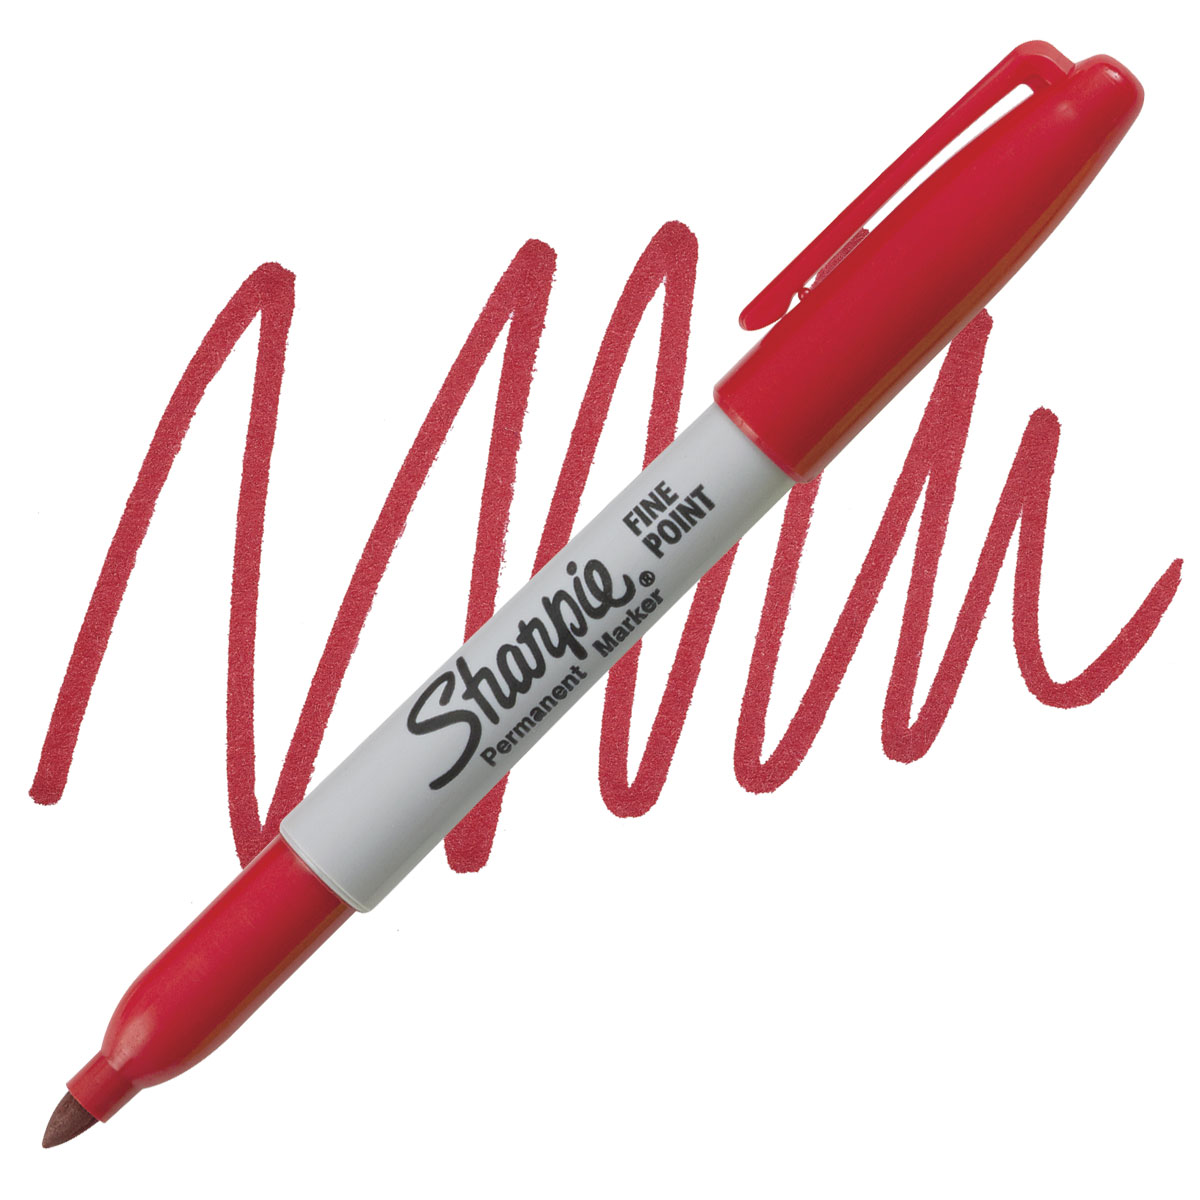 Sharpie Fine Point Permanent Marker - Red - Permanent Markers / Pens